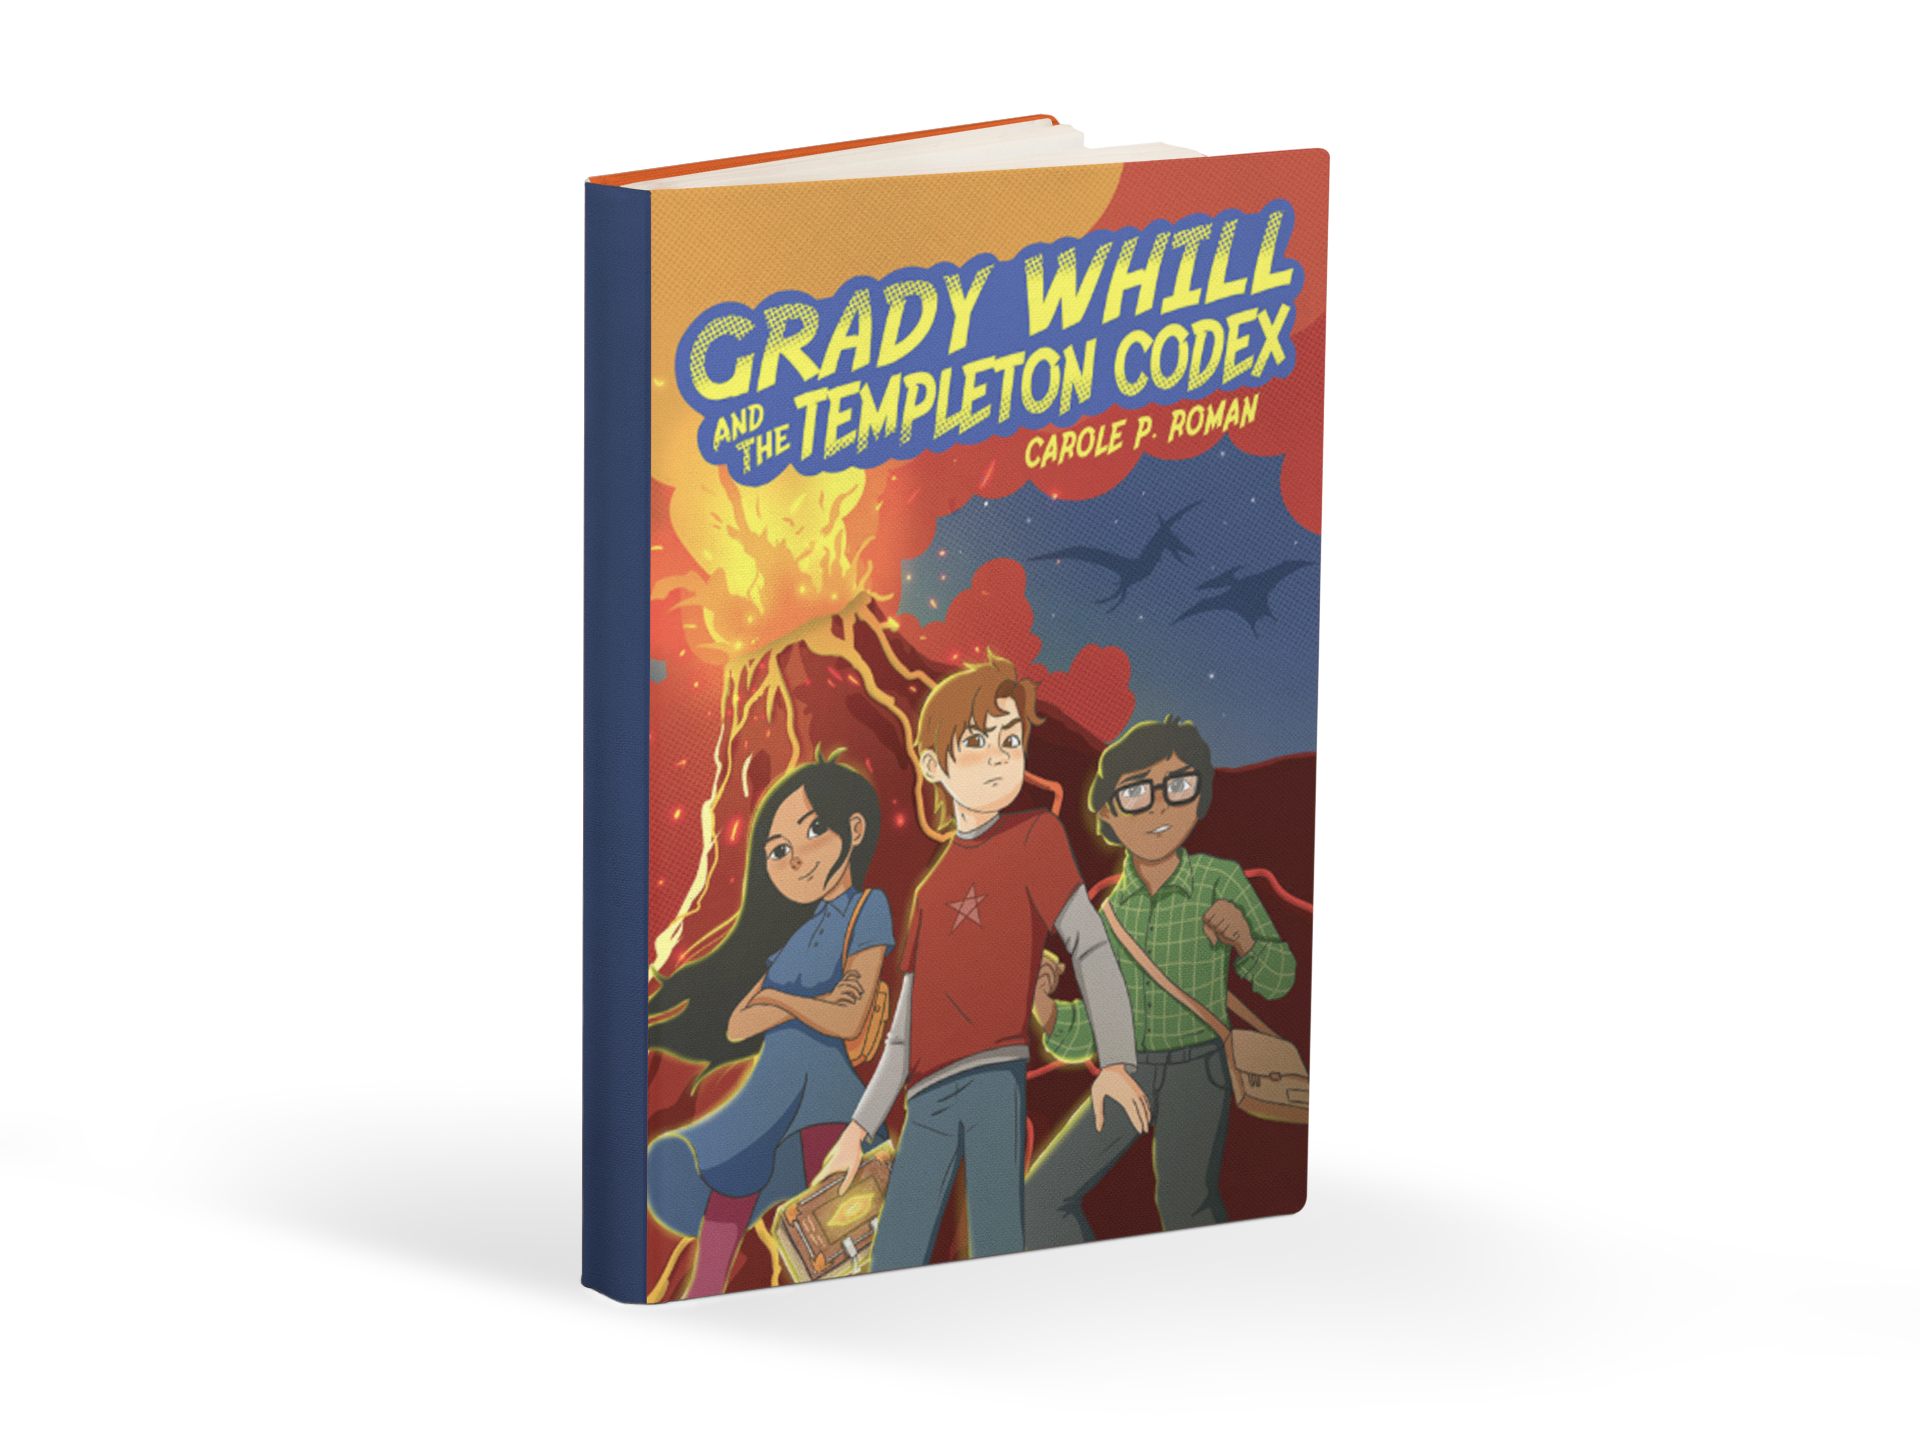 Grady Whill and the Templeton Codex by Carole P. Roman is an inspiring coming of age novel about finding inner strength and believing in oneself